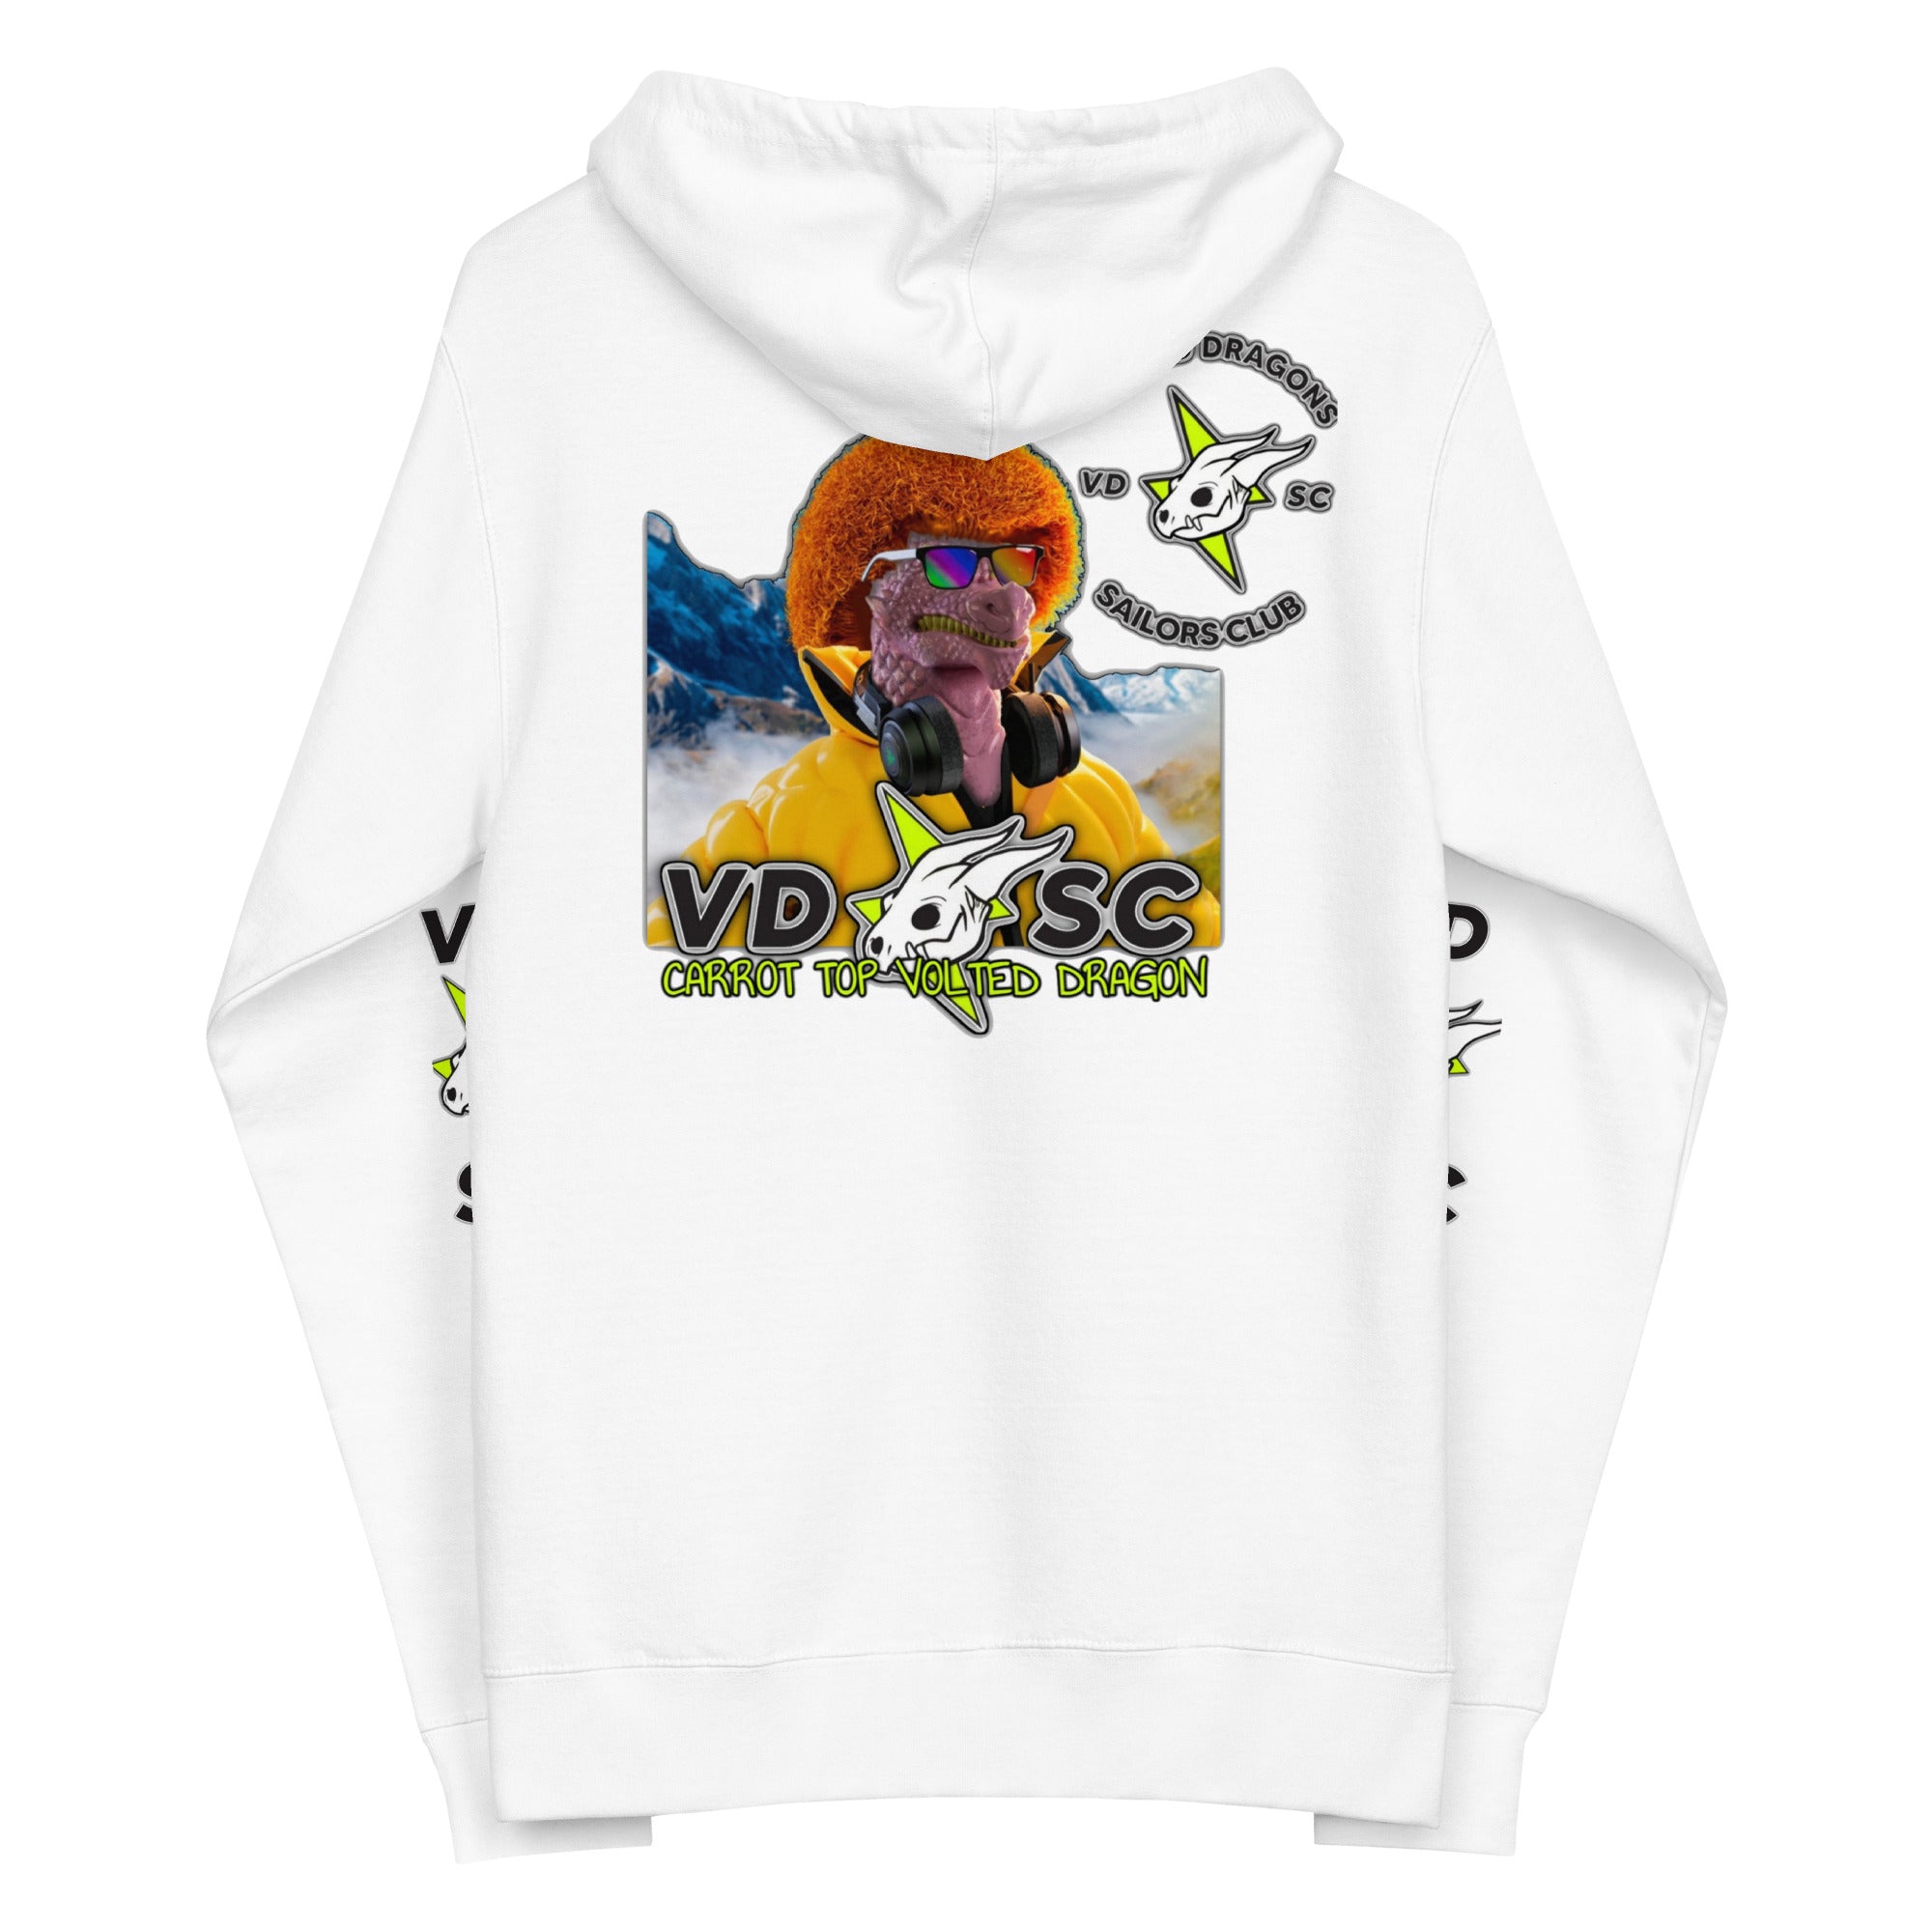 CARROT TOP VOLTED DRAGON VDSC NFT #7689 - NFTees365